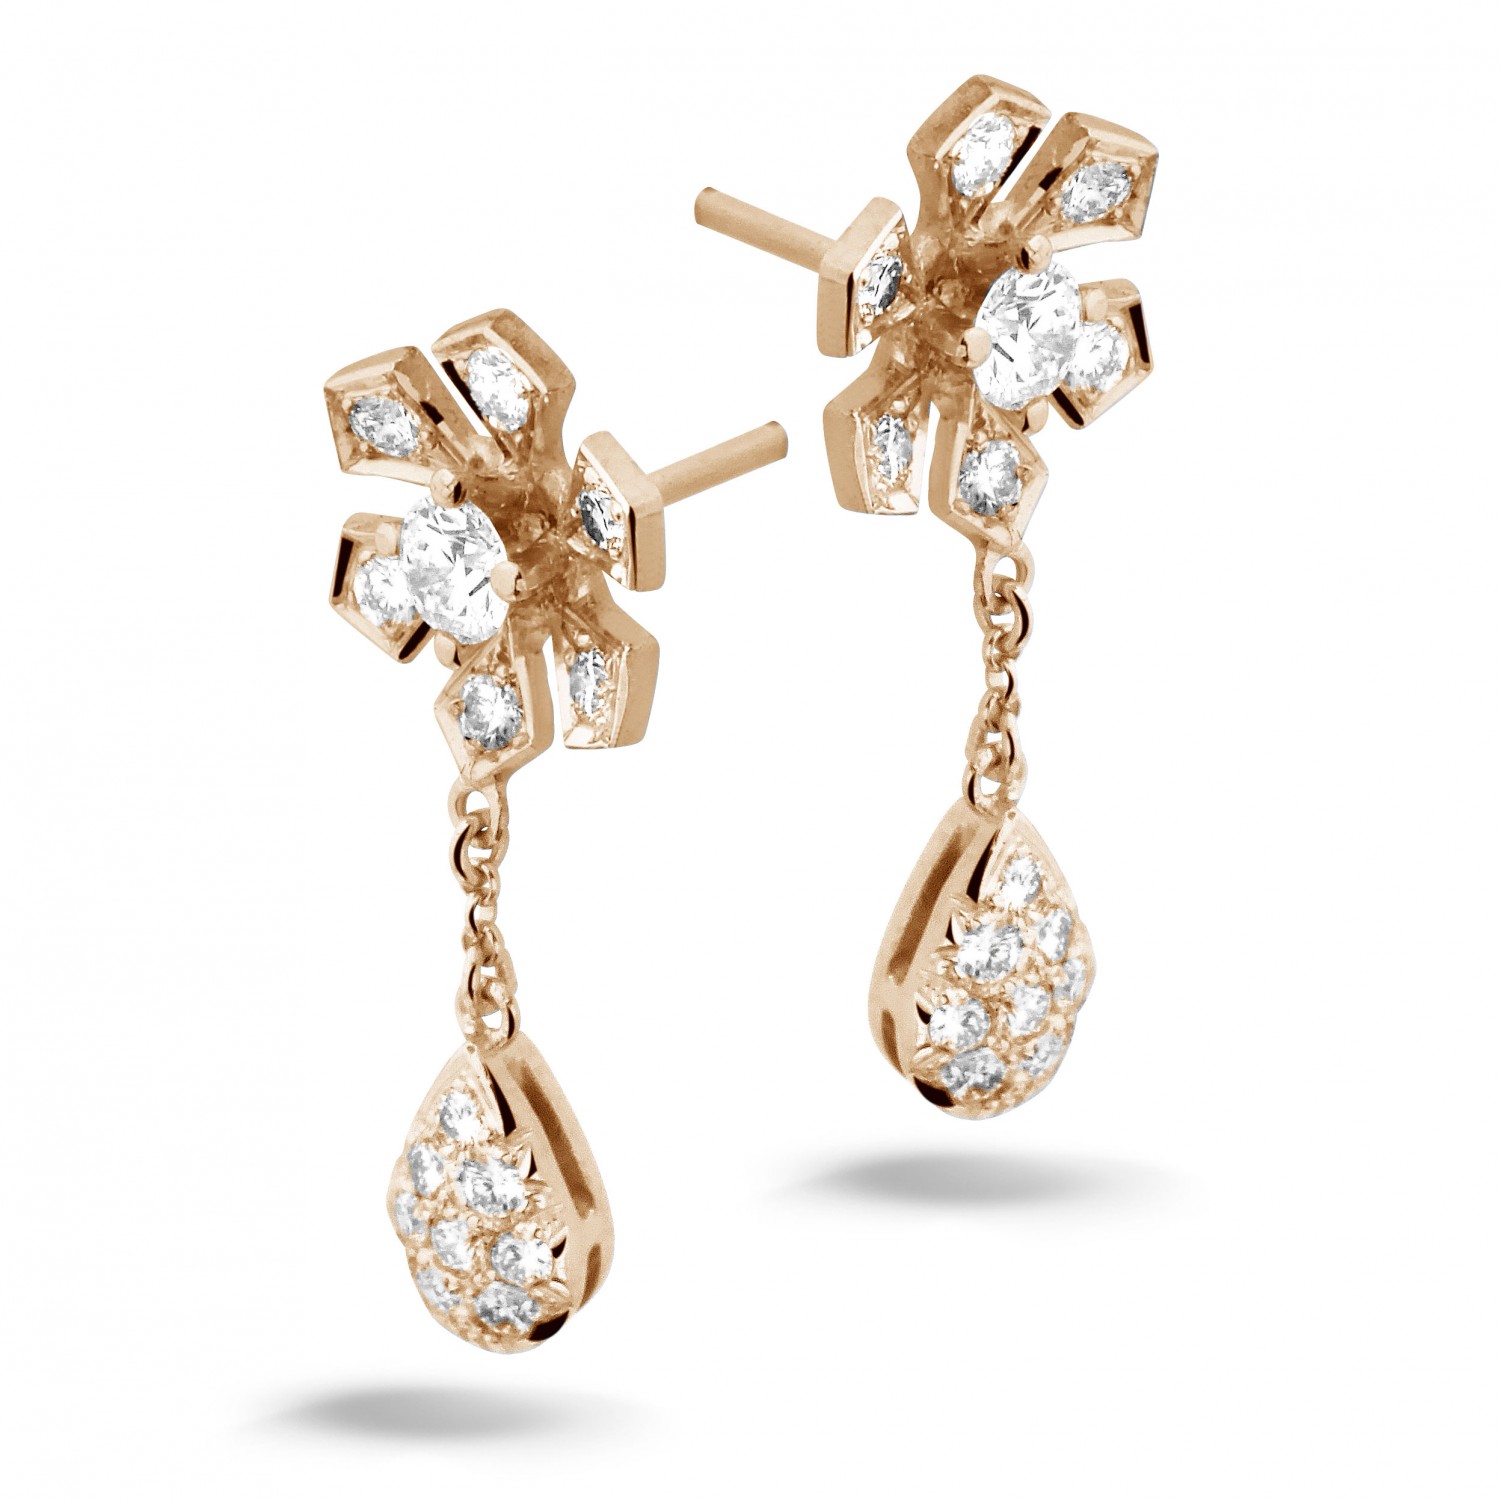 Cluster earrings with 0.90 carat diamonds in red gold - BAUNAT